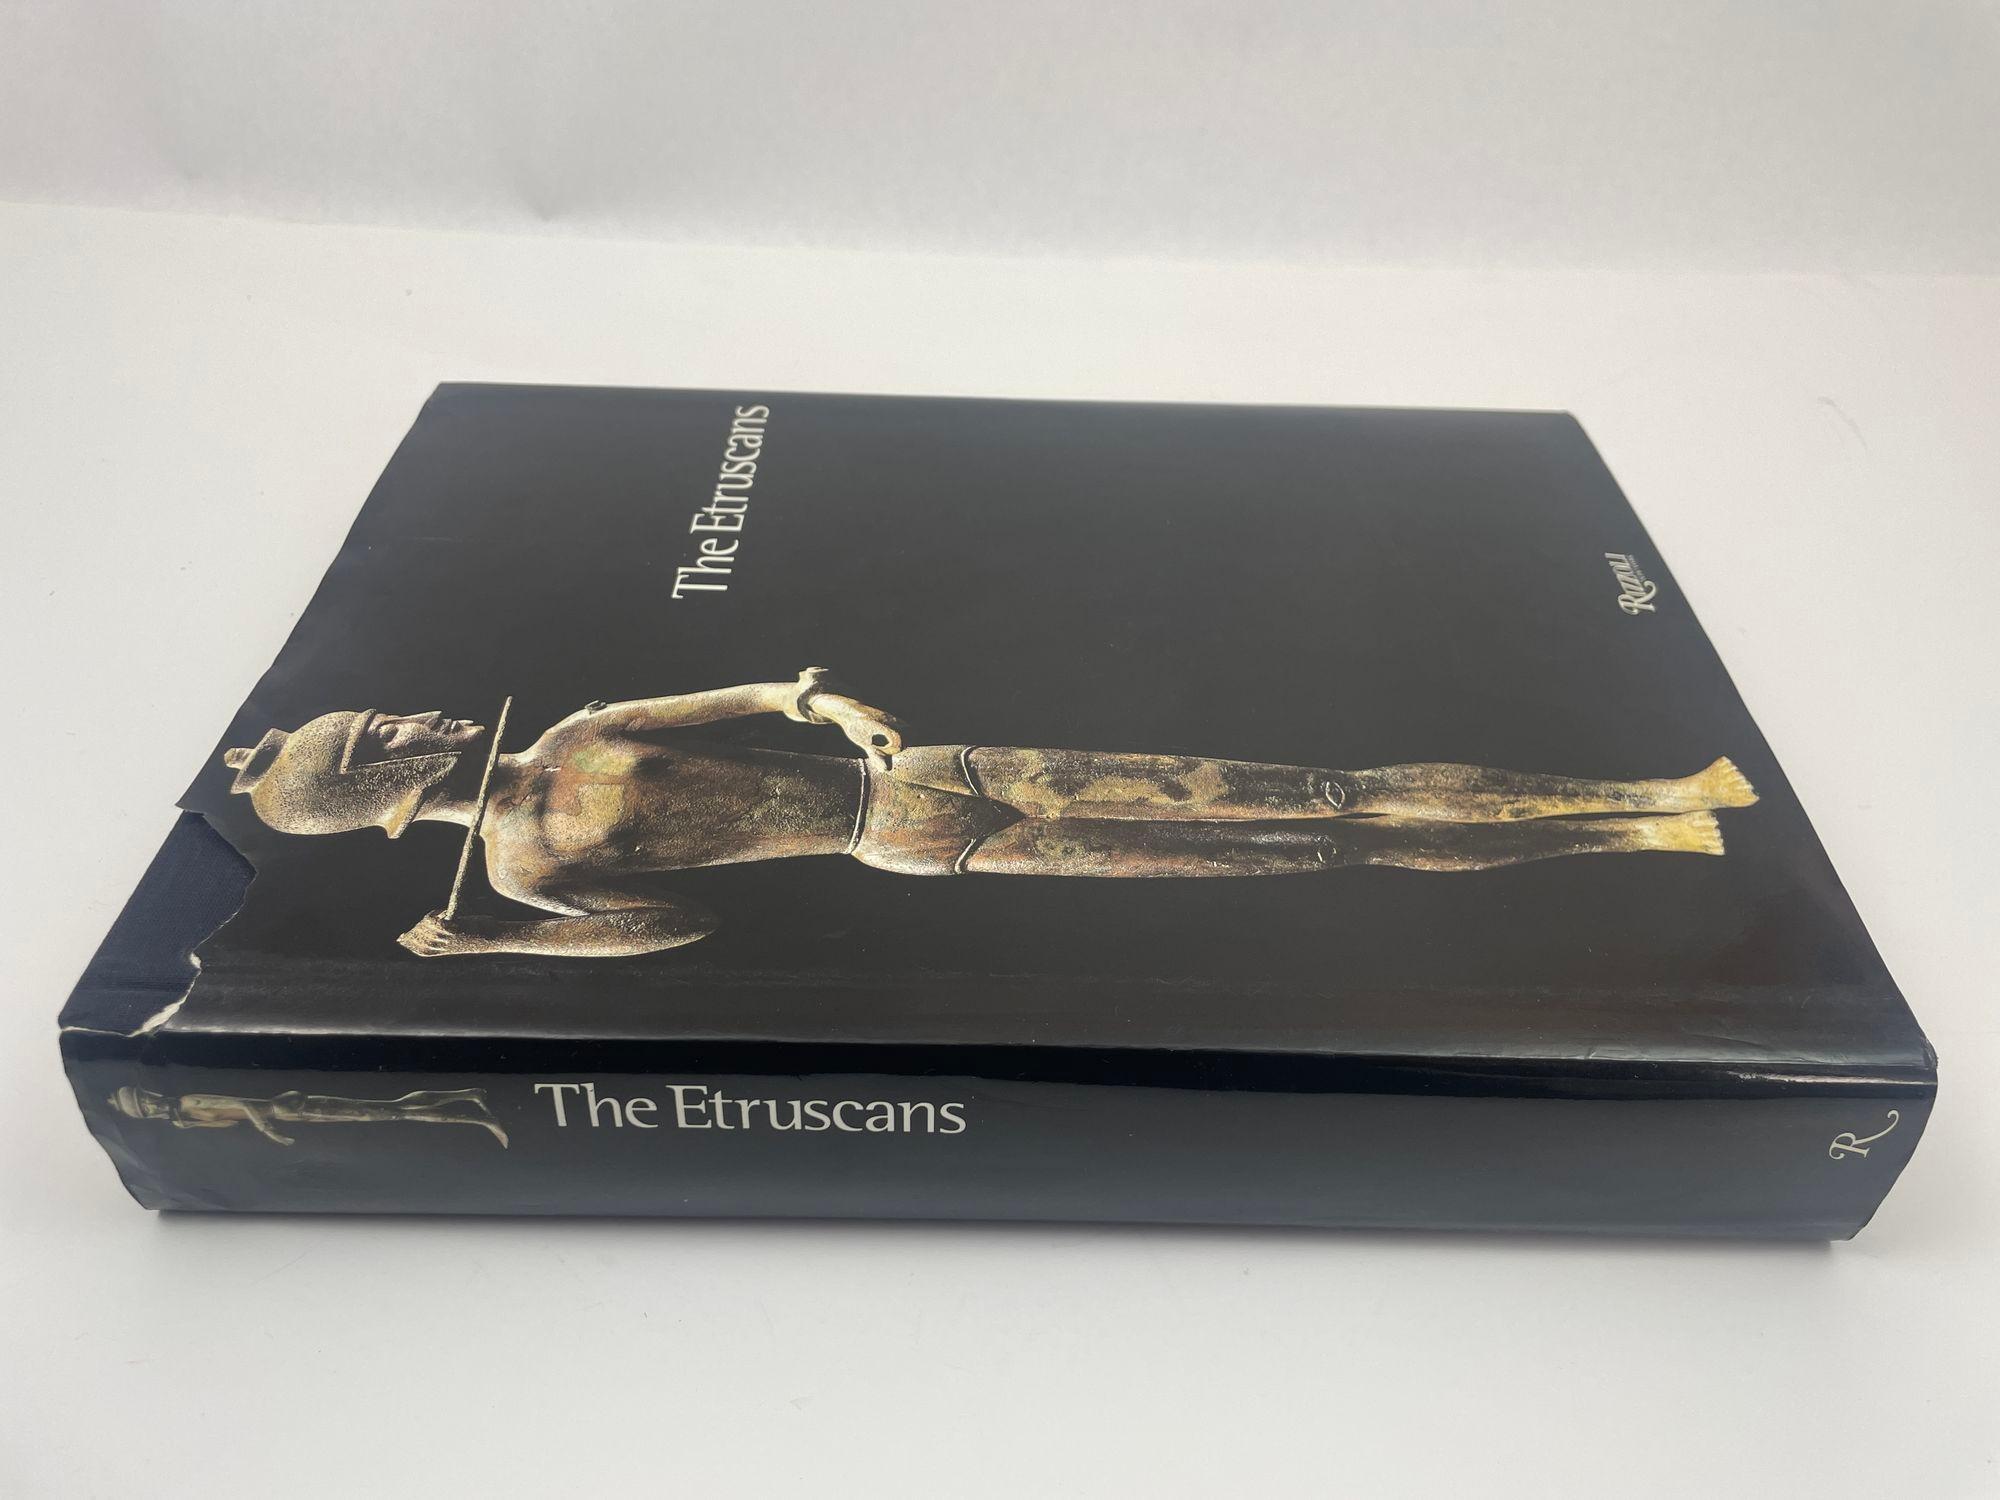 Expressionniste The Etruscans Hardcover Book by Mario Torelli 1st Ed. 2001 Rizzoli en vente